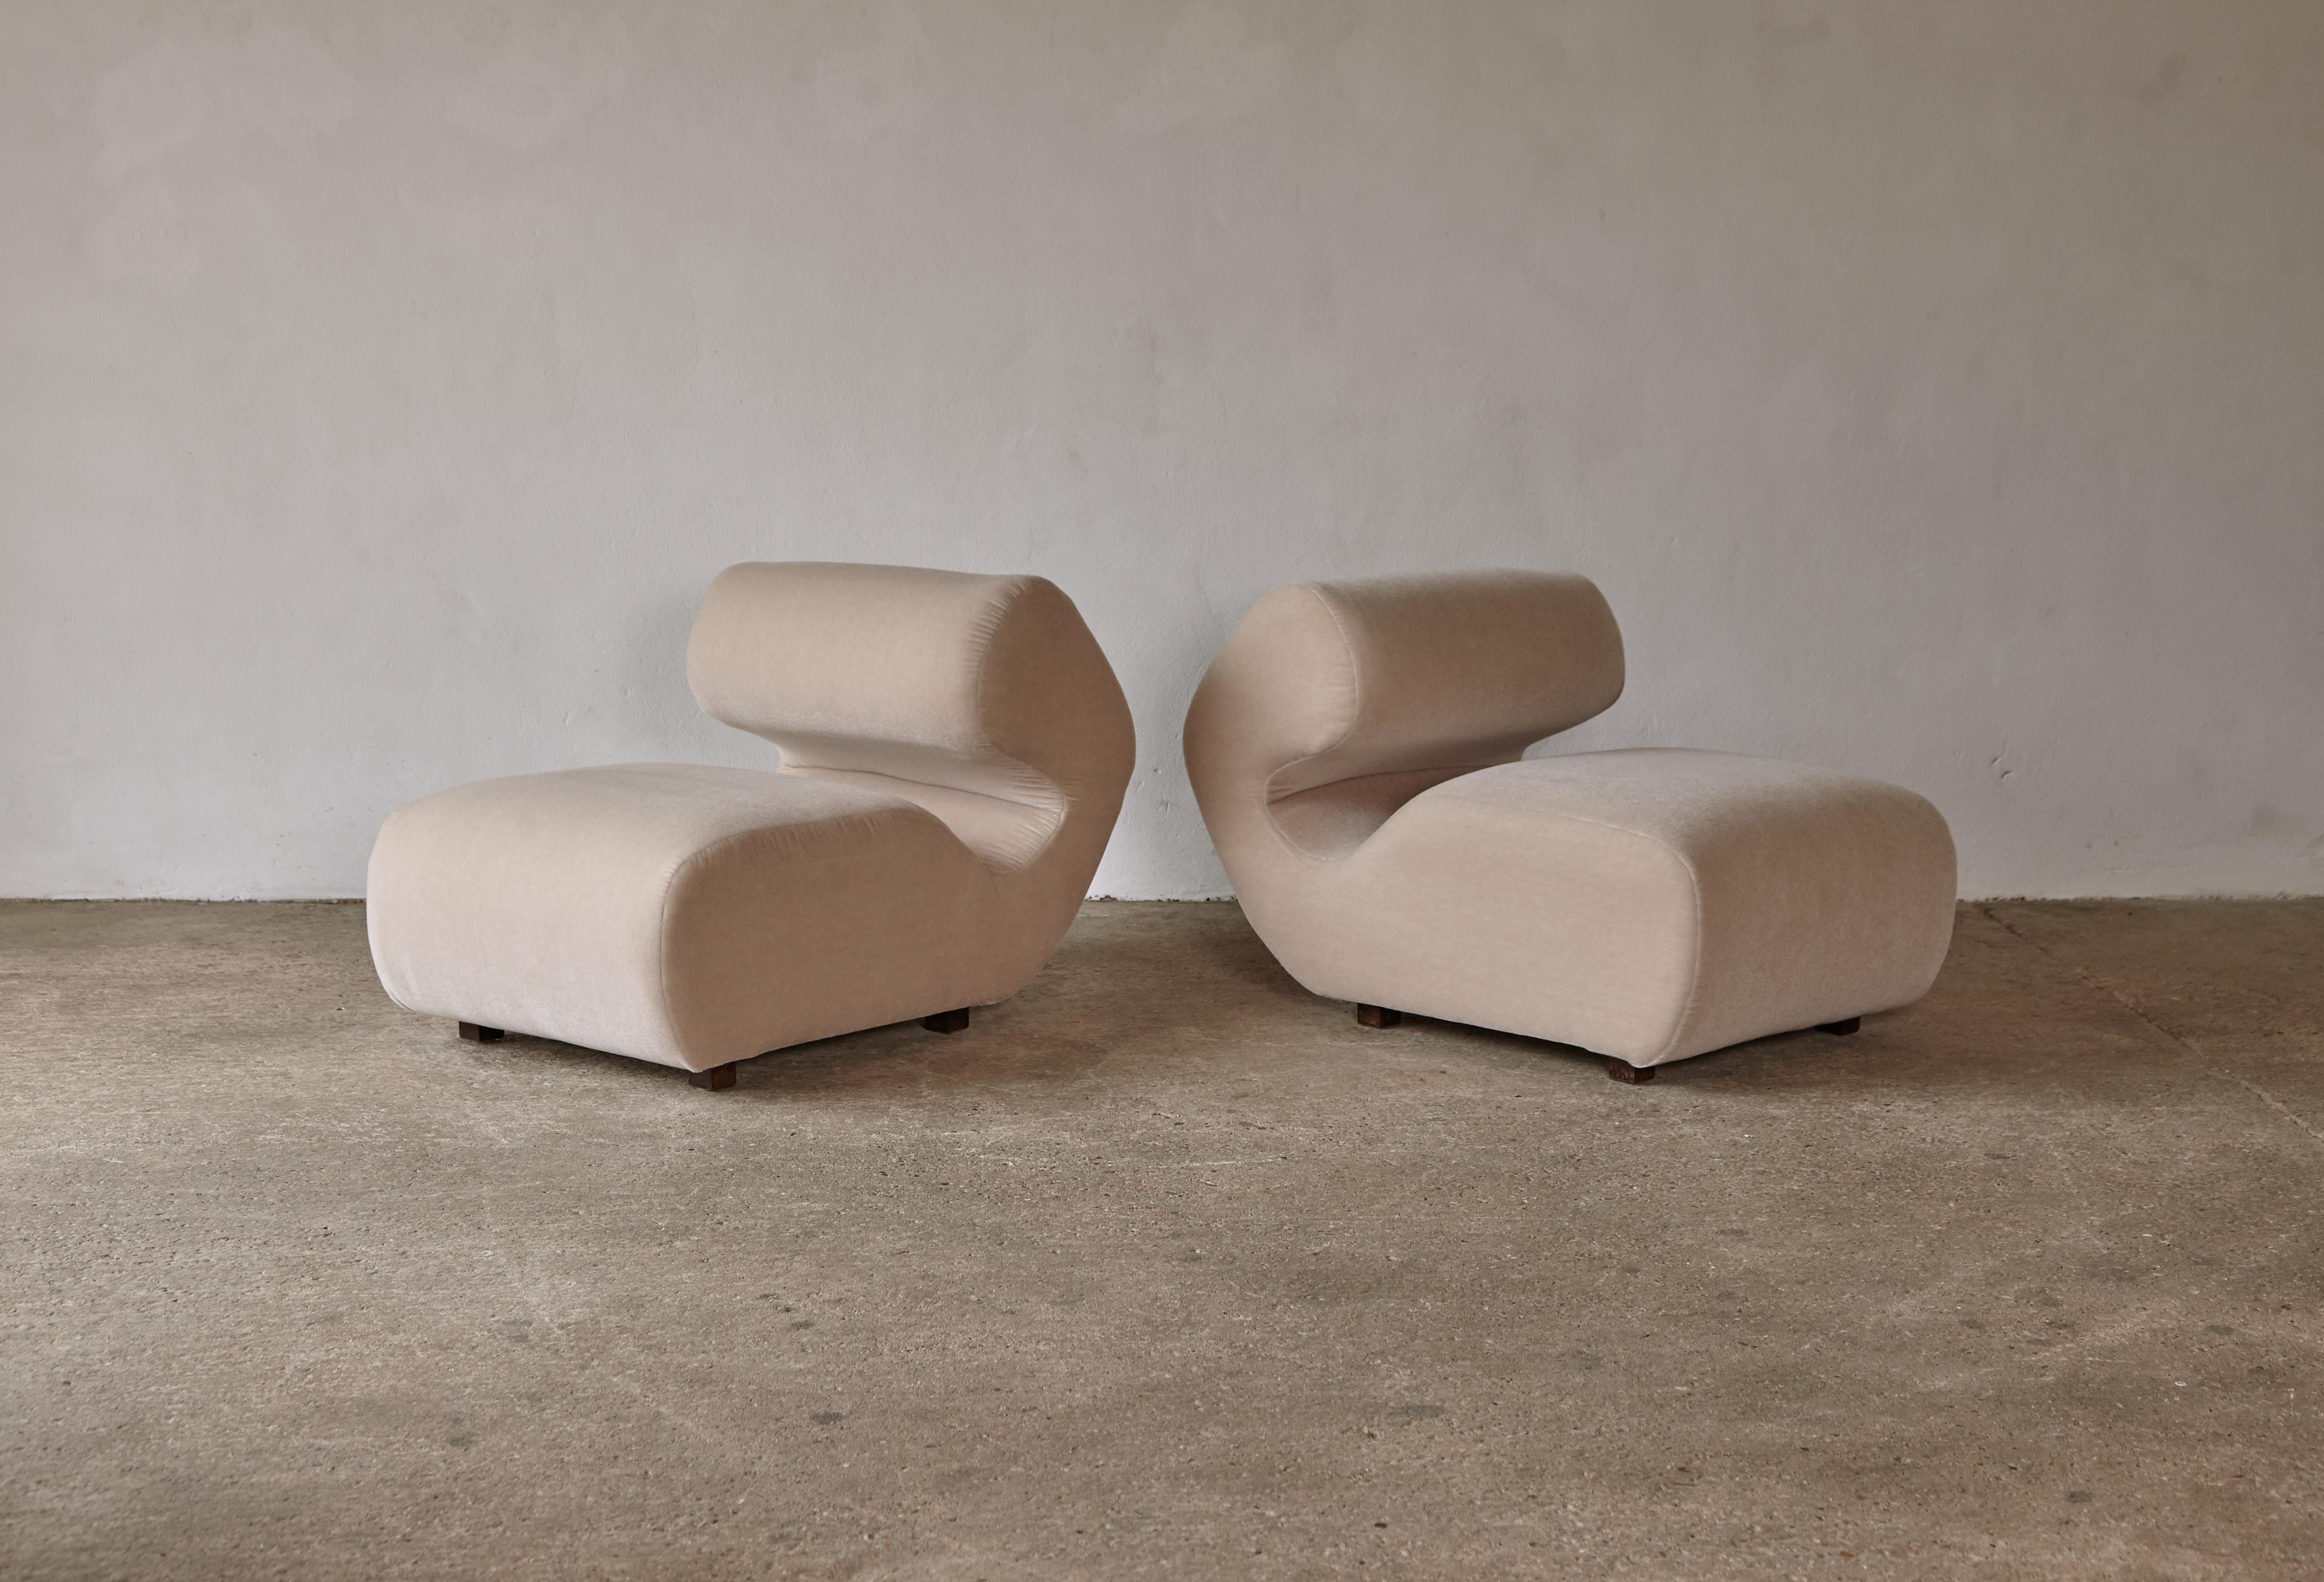 Italian Rare Sculptural Chairs in Mohair, Italy, 1970s / 80s For Sale